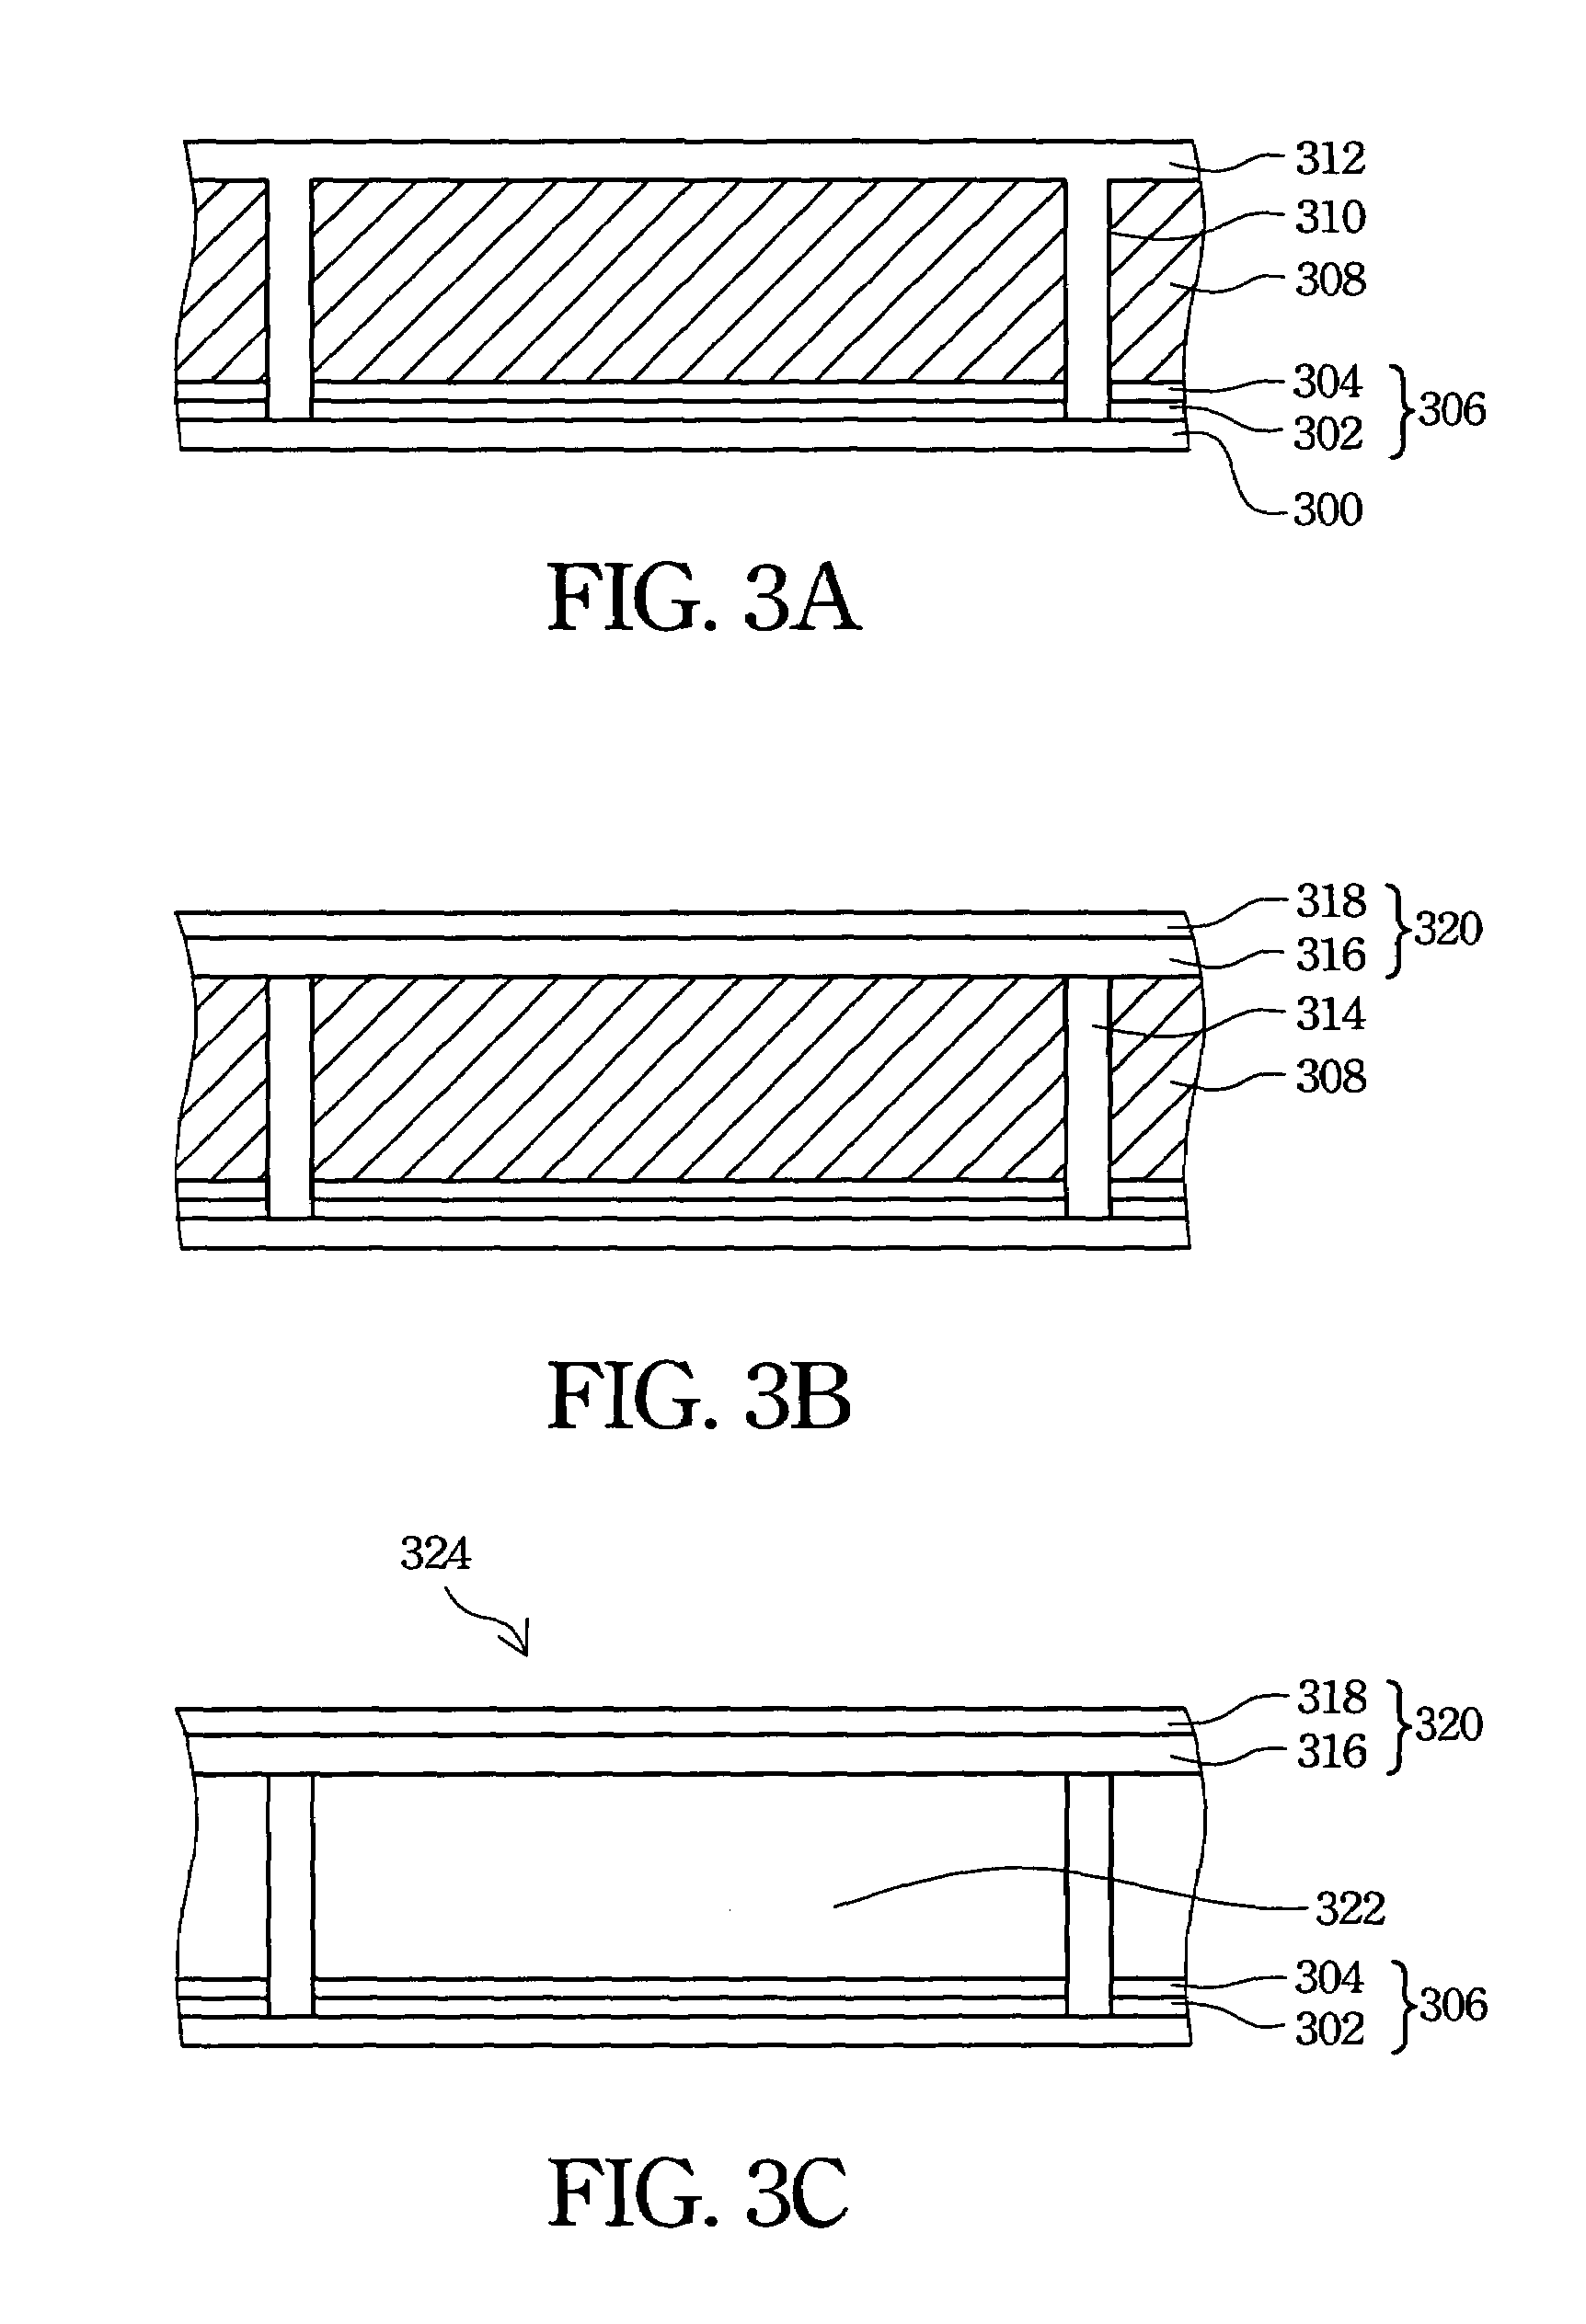 Structure of an optical interference display unit